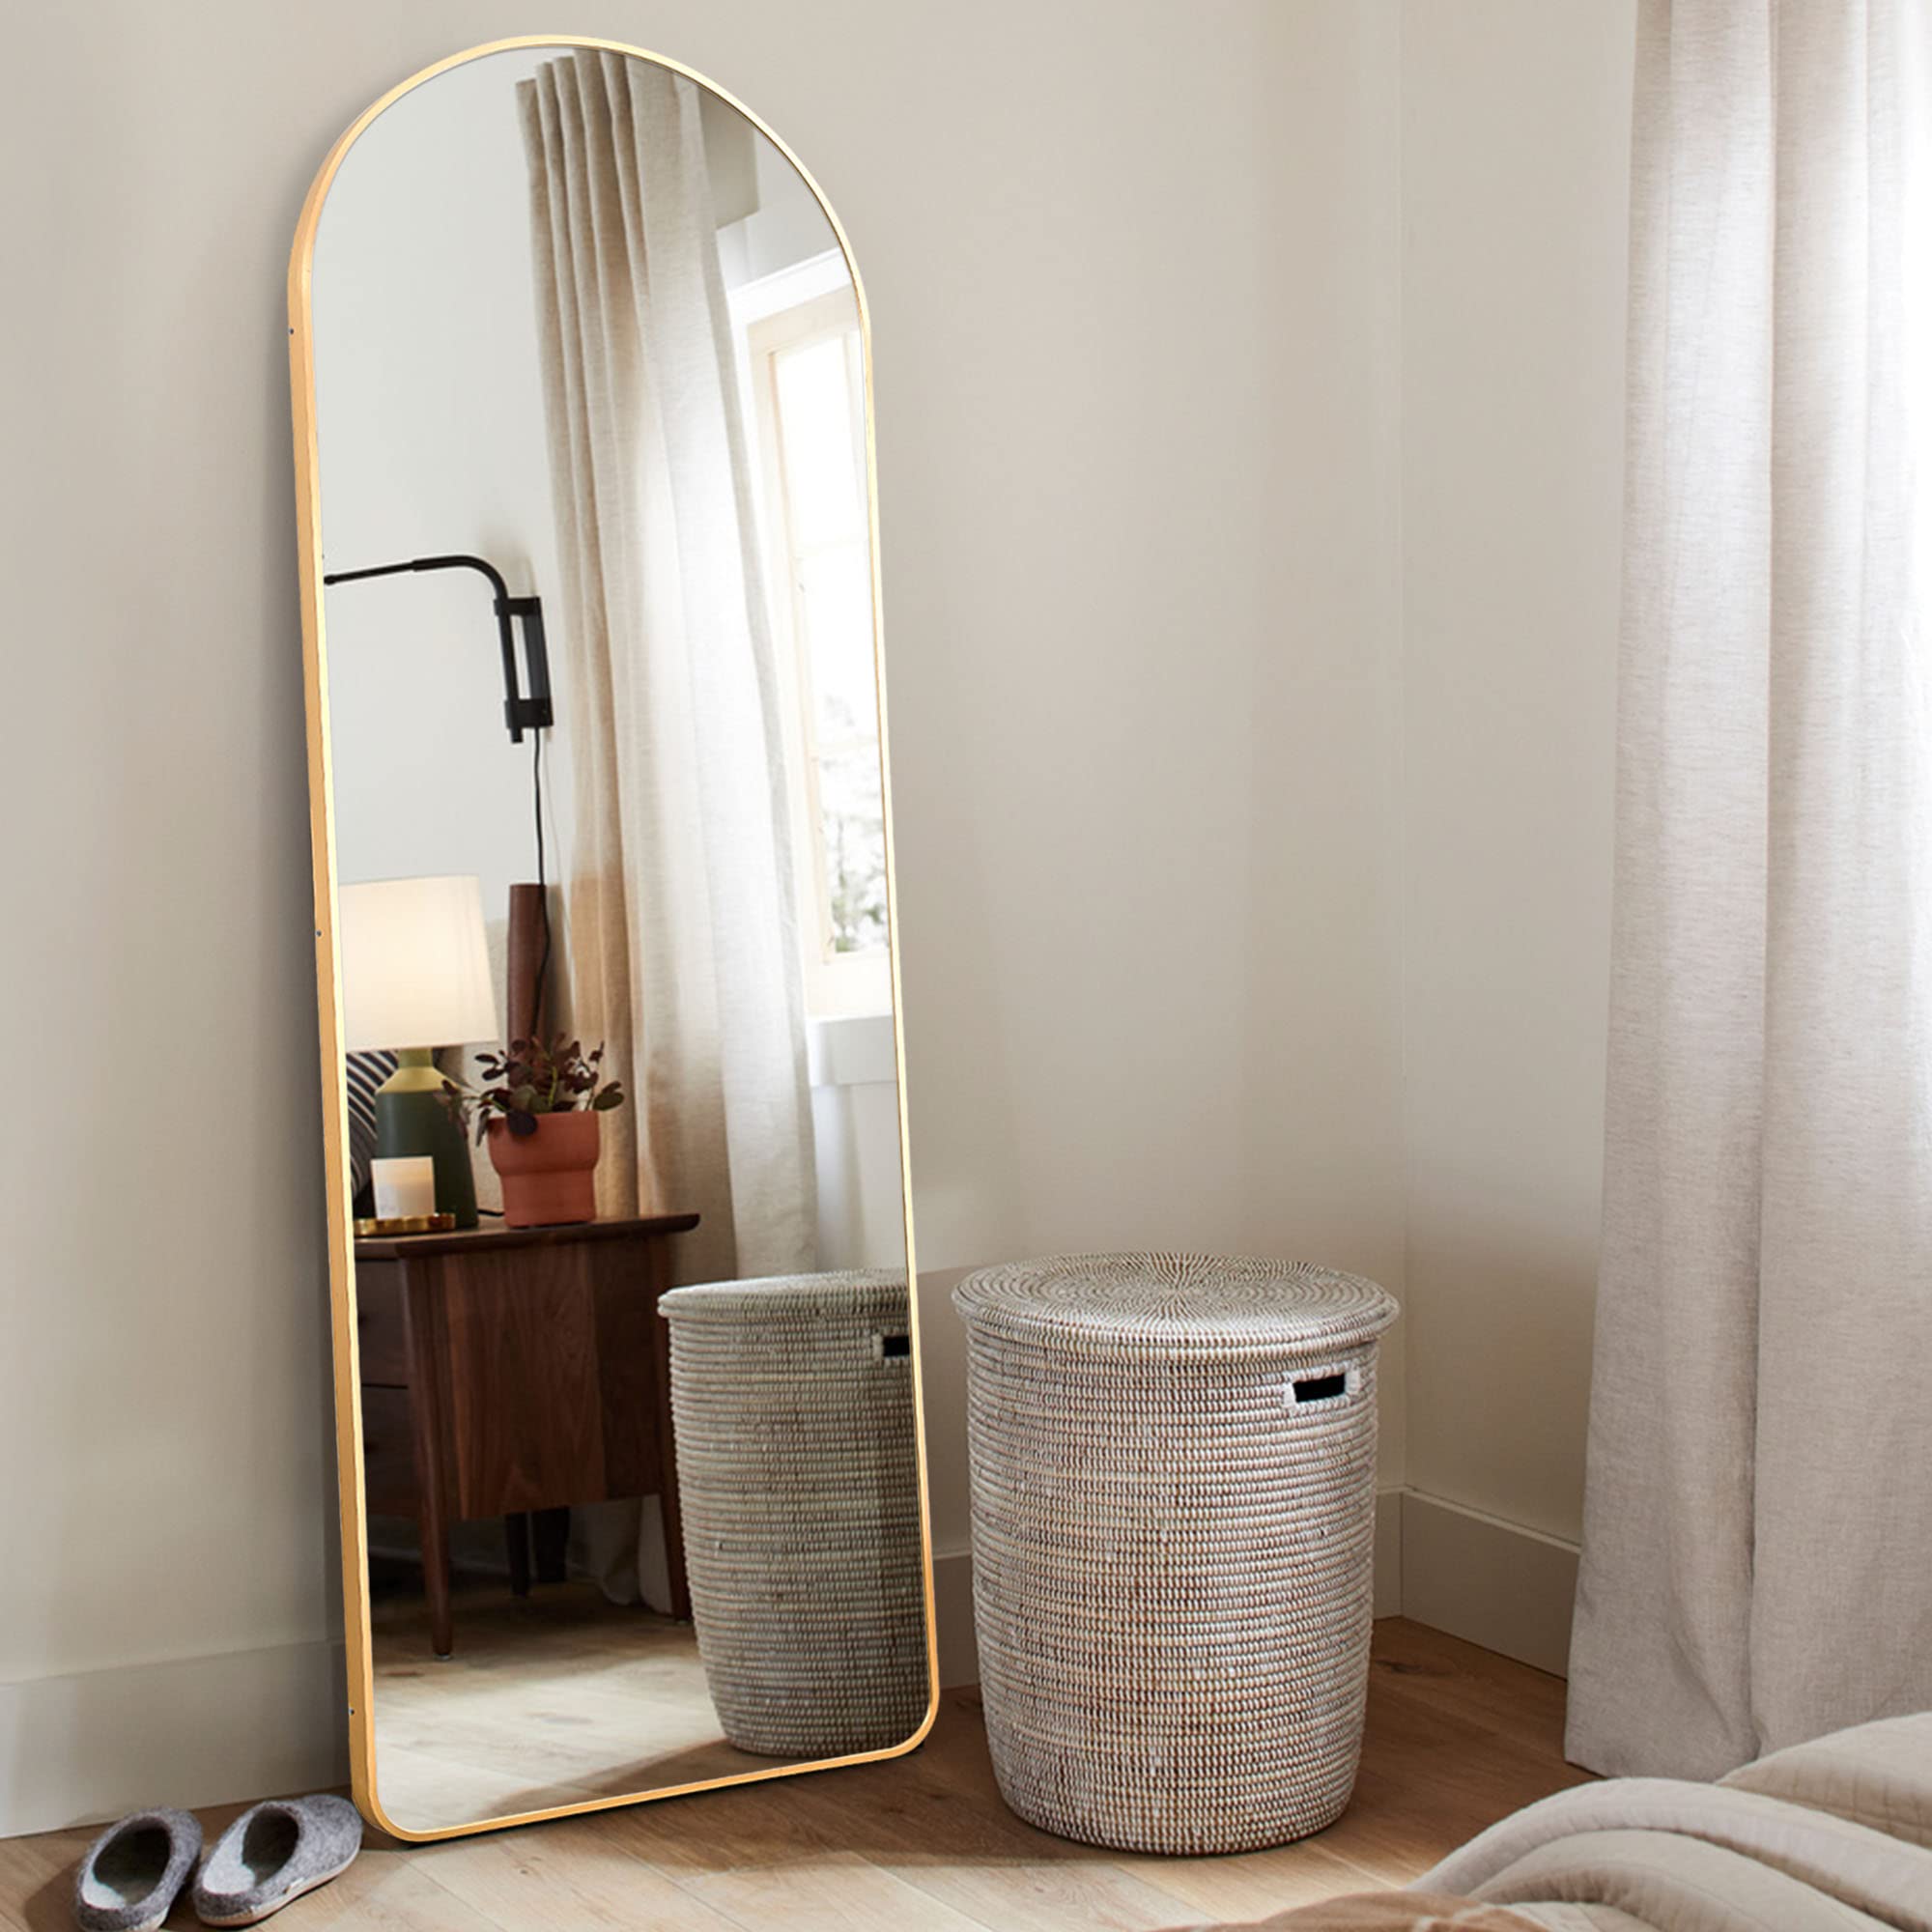 59" x 20" KIAYACI Arched Full Length Mirror w/ Stand (Gold) $39 + Free Shipping